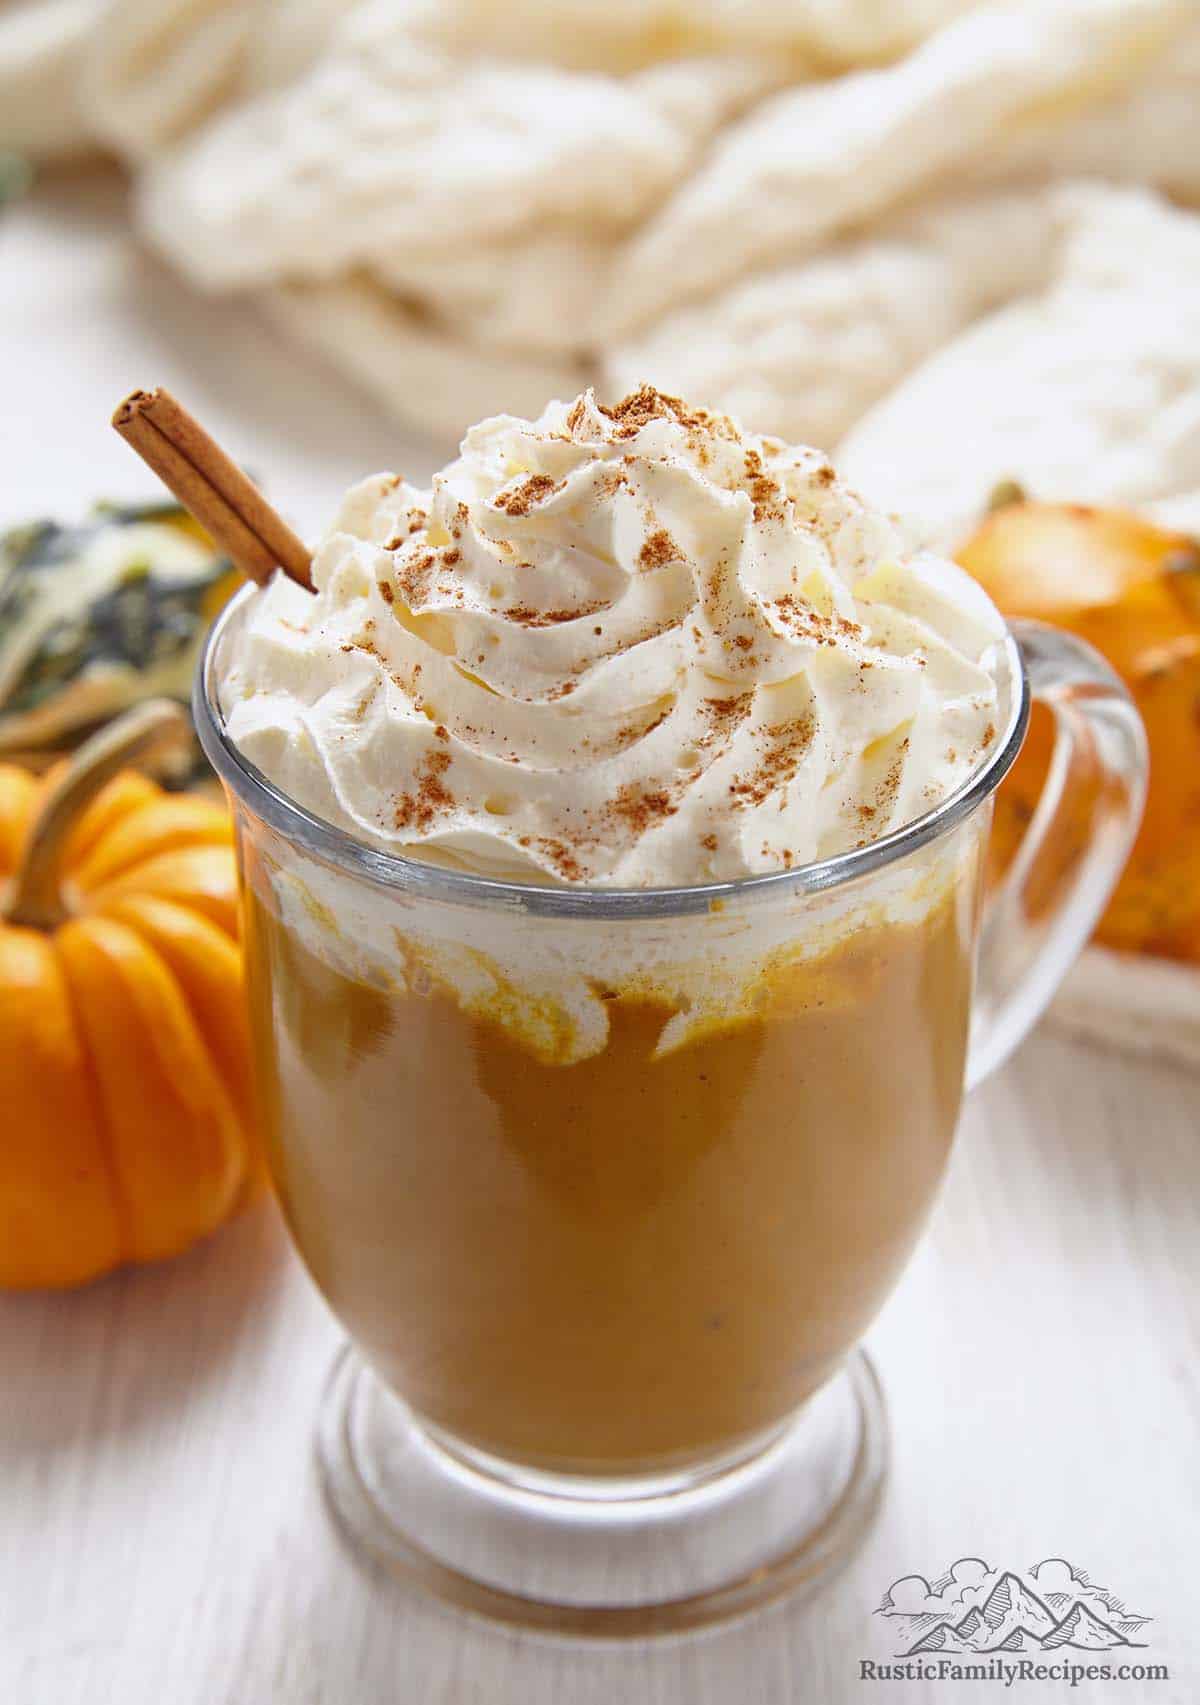 Homemade pumpkin spice latte in a glass mug with whipped cream and cinnamon